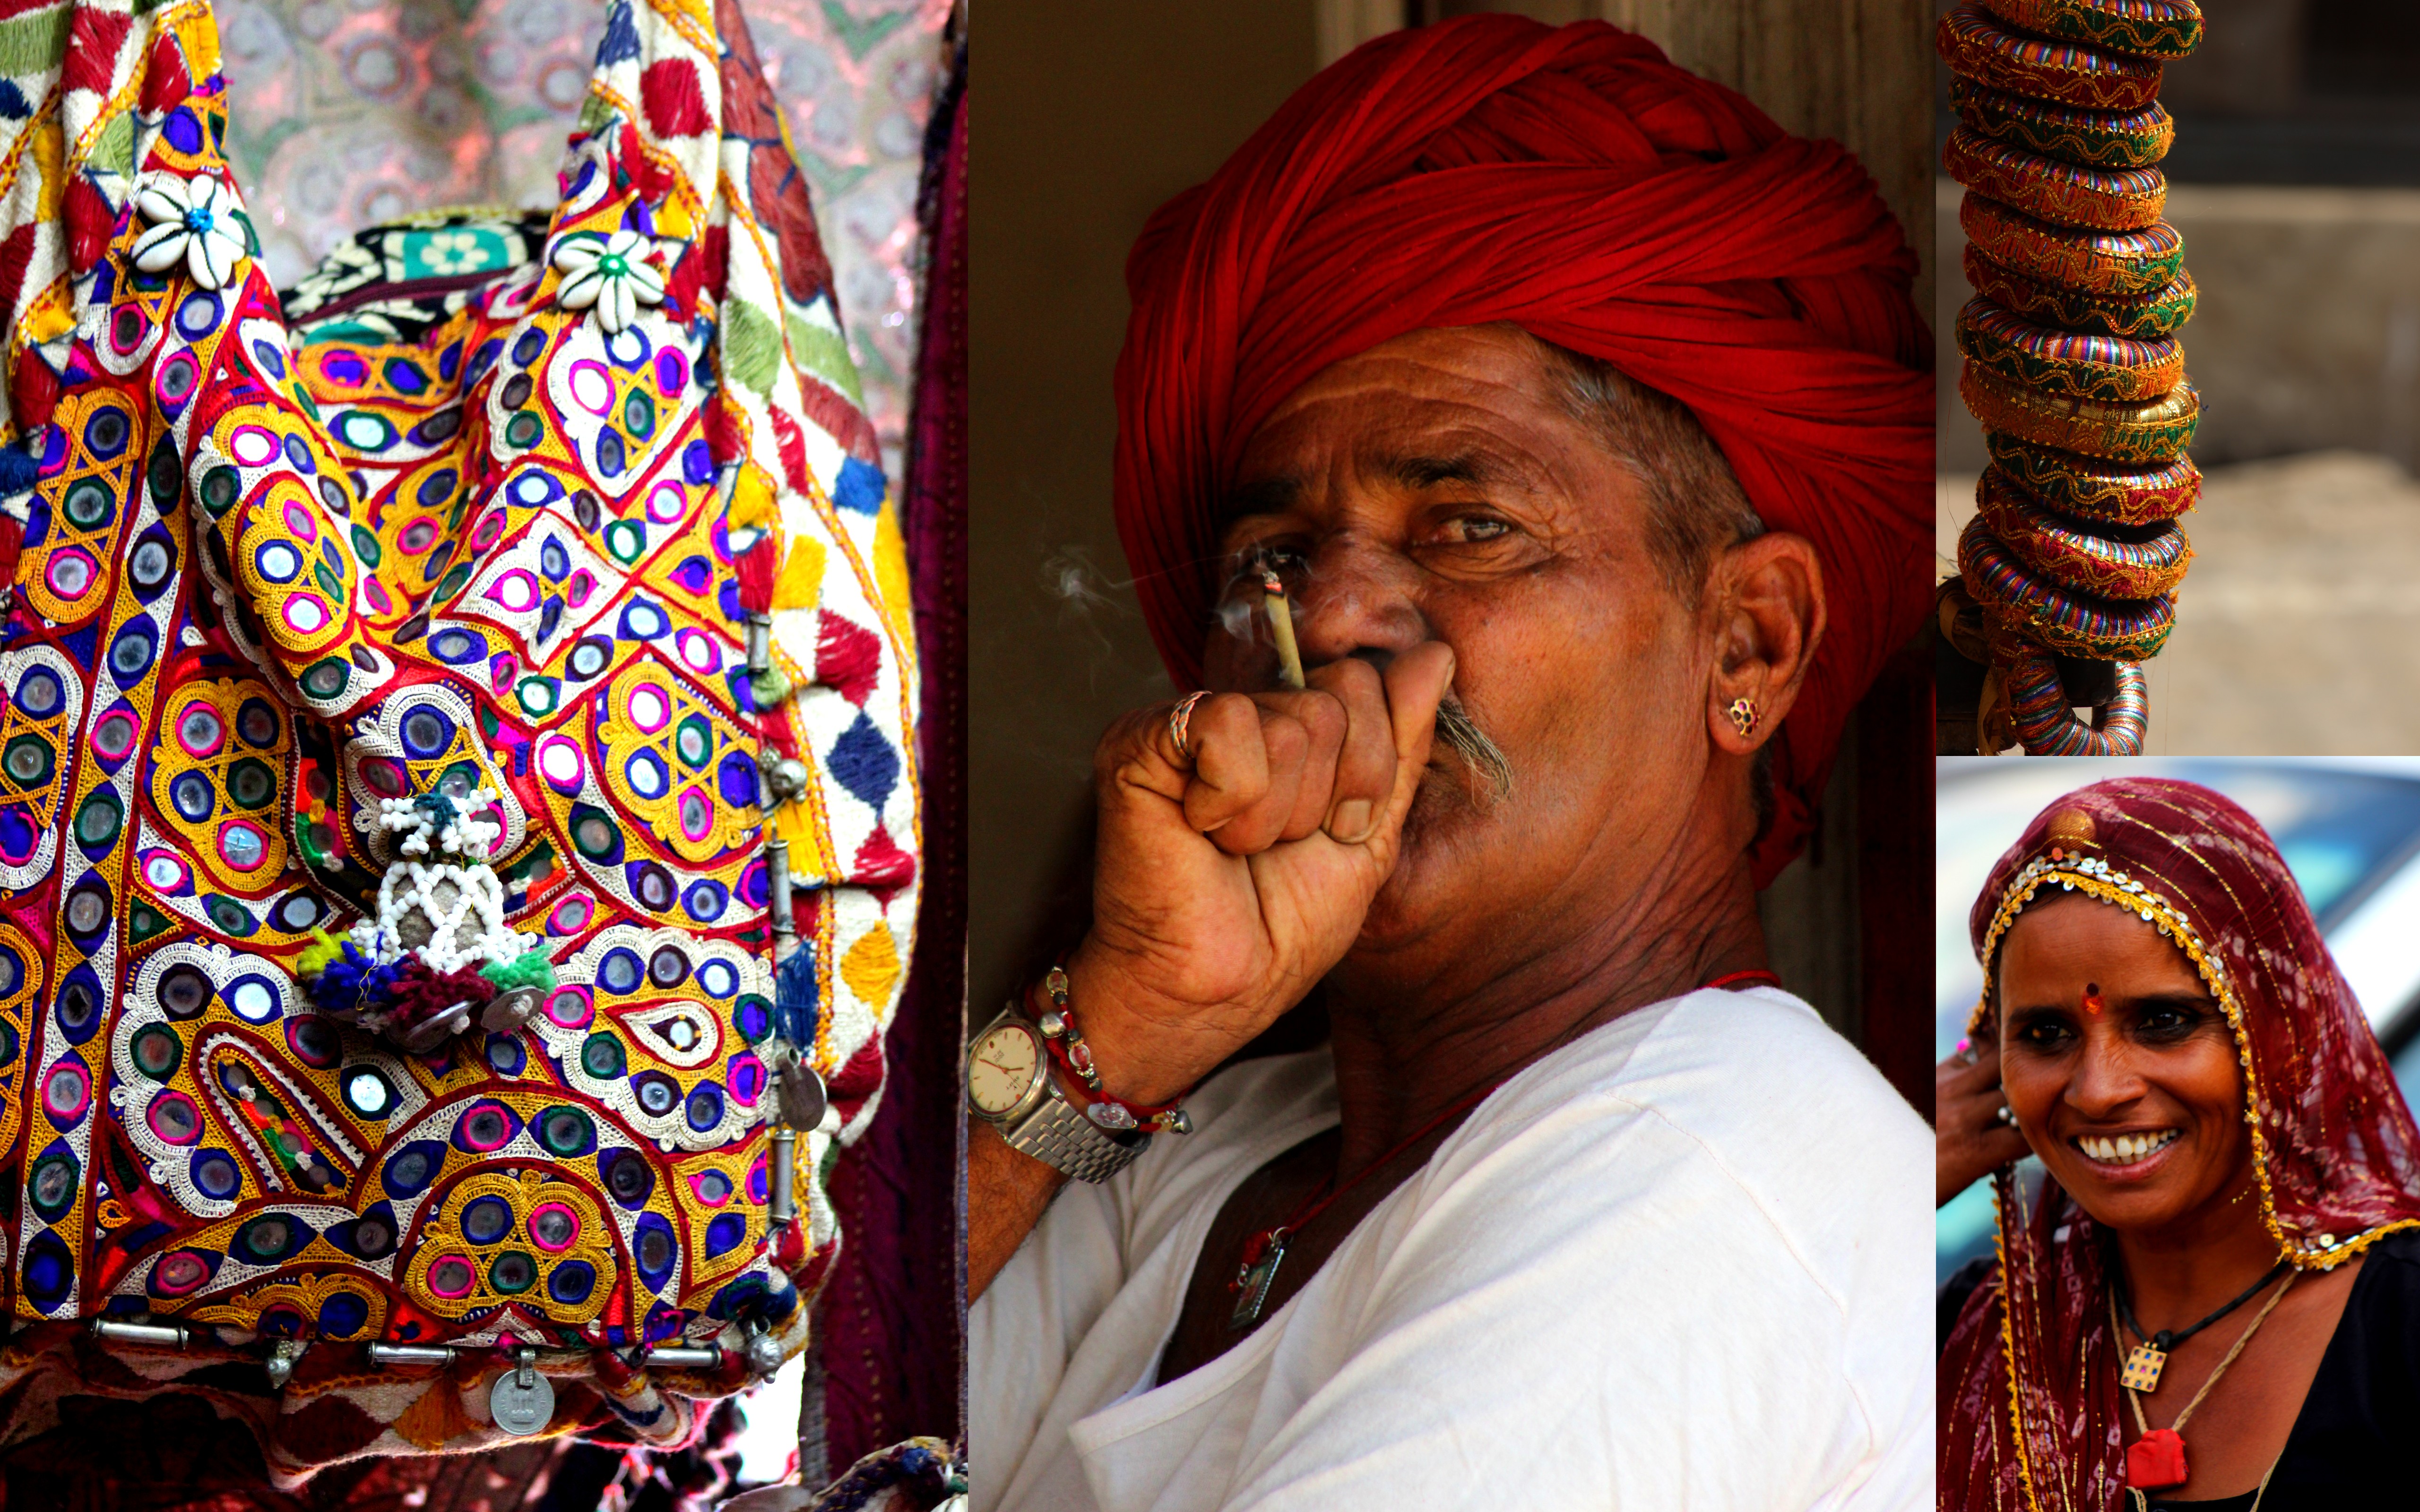 Jodhpur: The Land of Fables and Facades